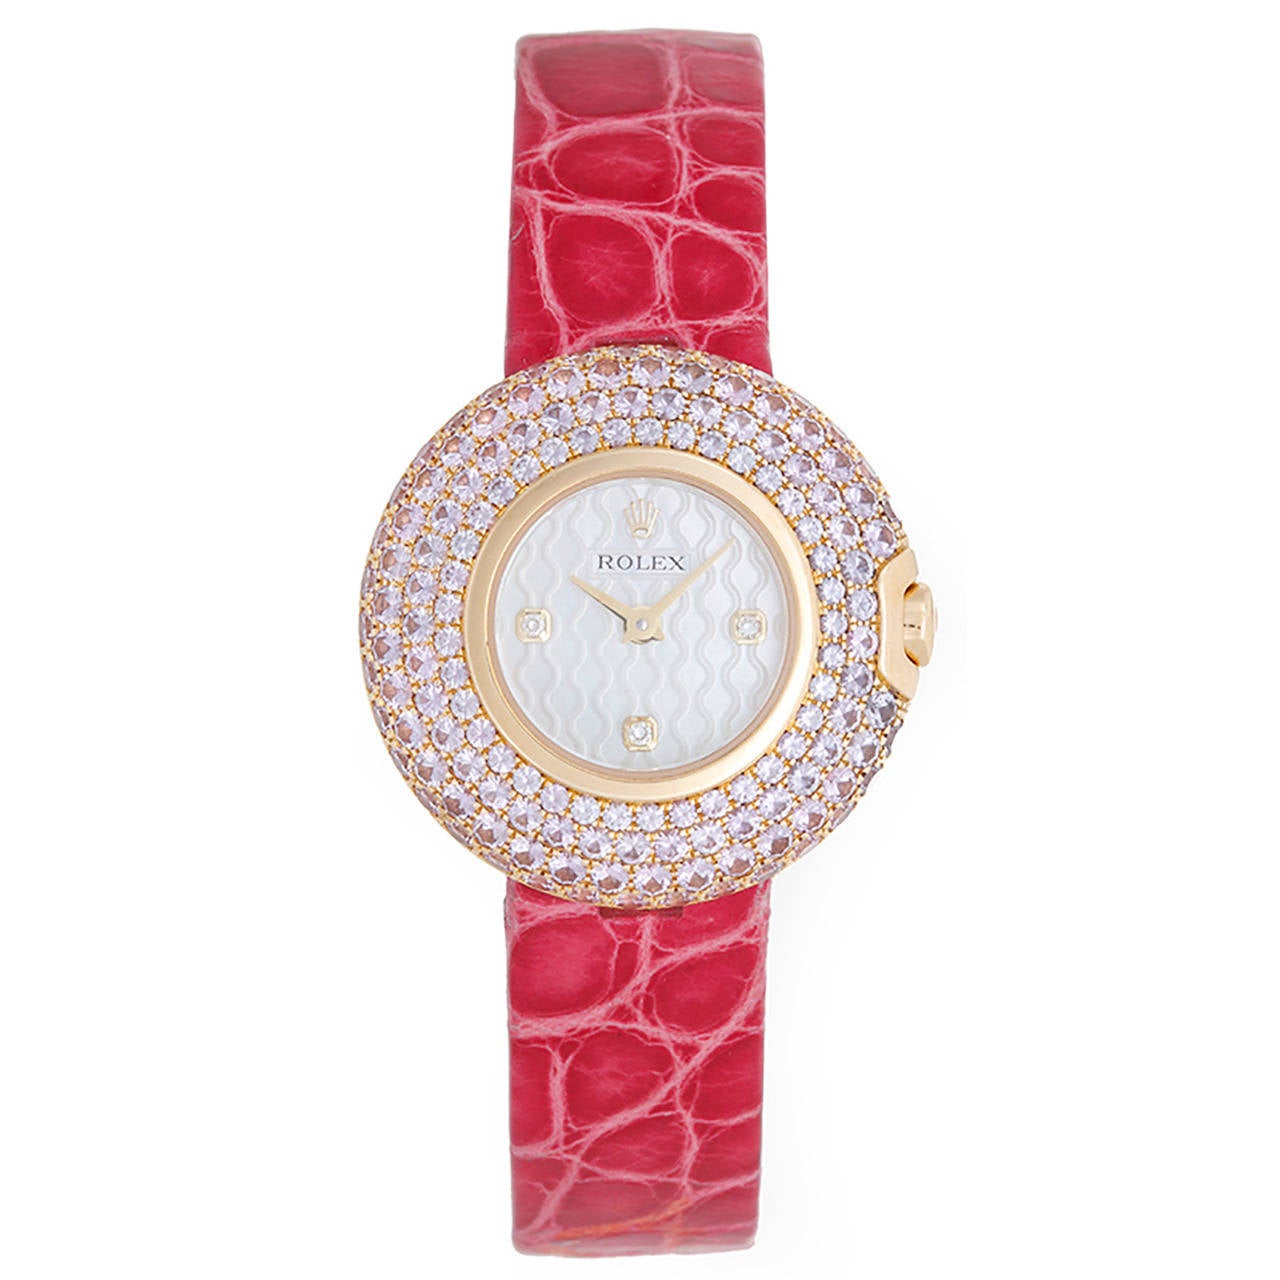 Rolex Ladies Gold and Pink Sapphire Cellini Orchid Wristwatch Model 6201/9